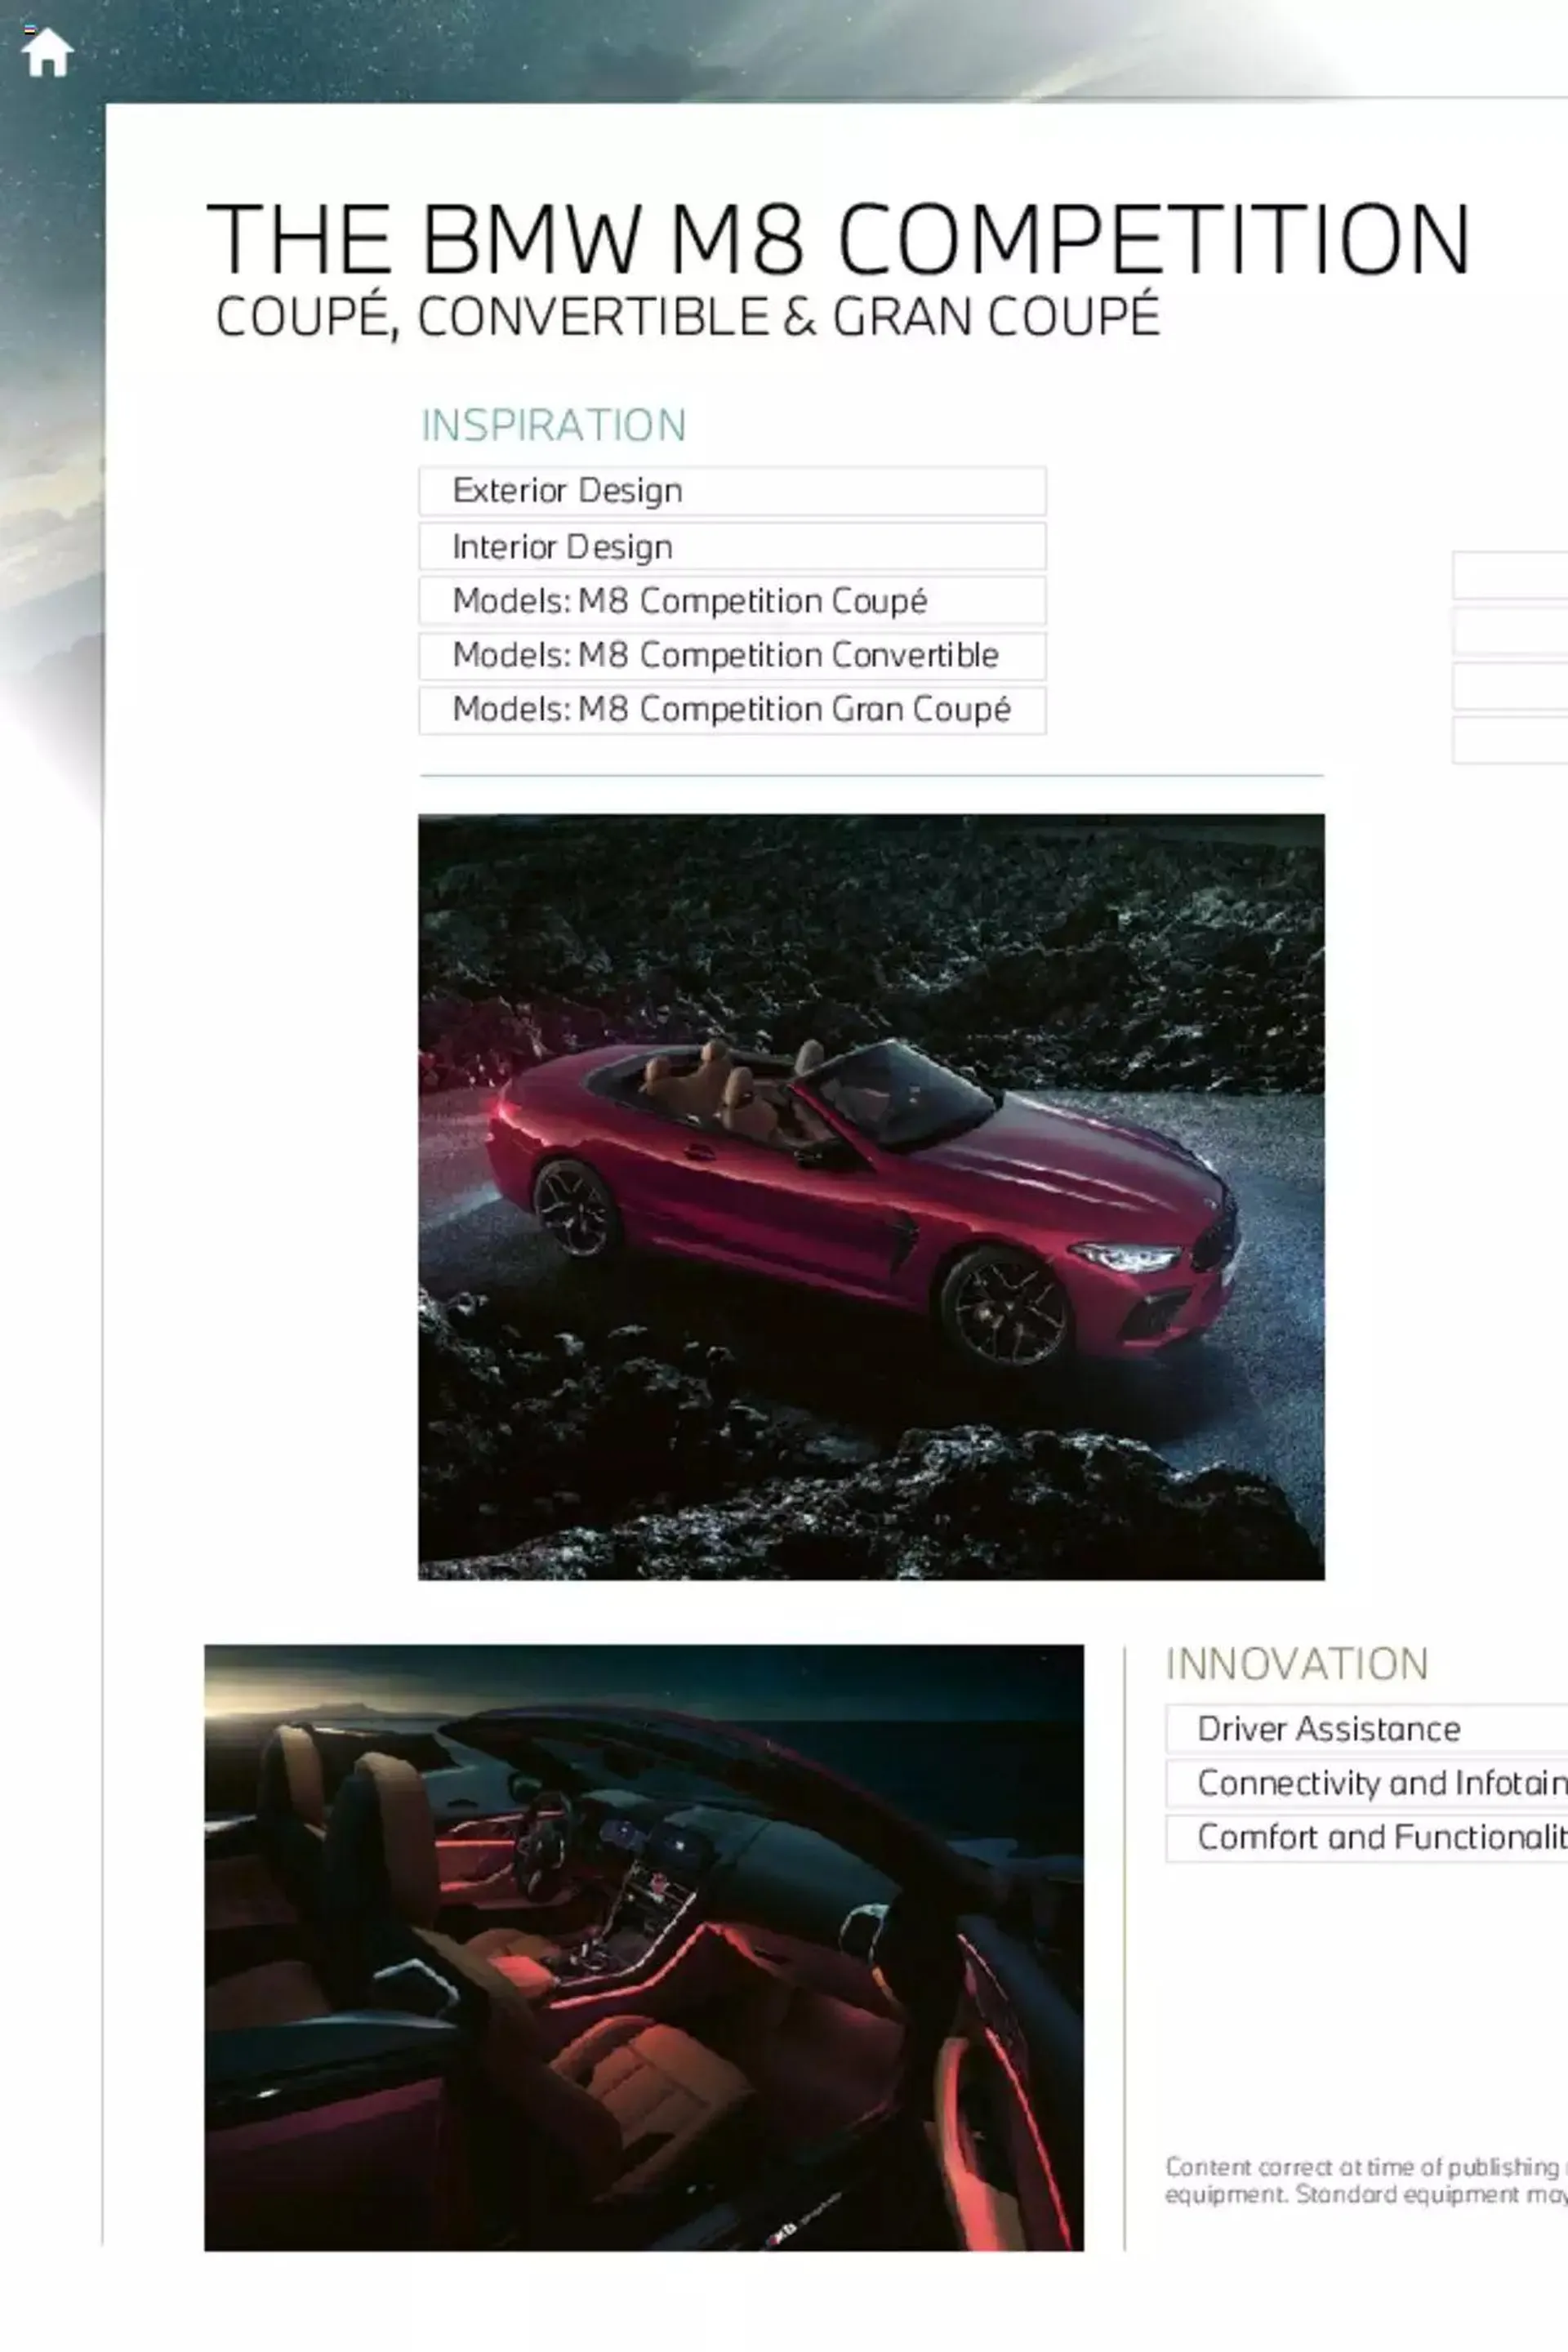 BMW - M8 Coupe, Convertible and Gran Coupe Brochure - 2